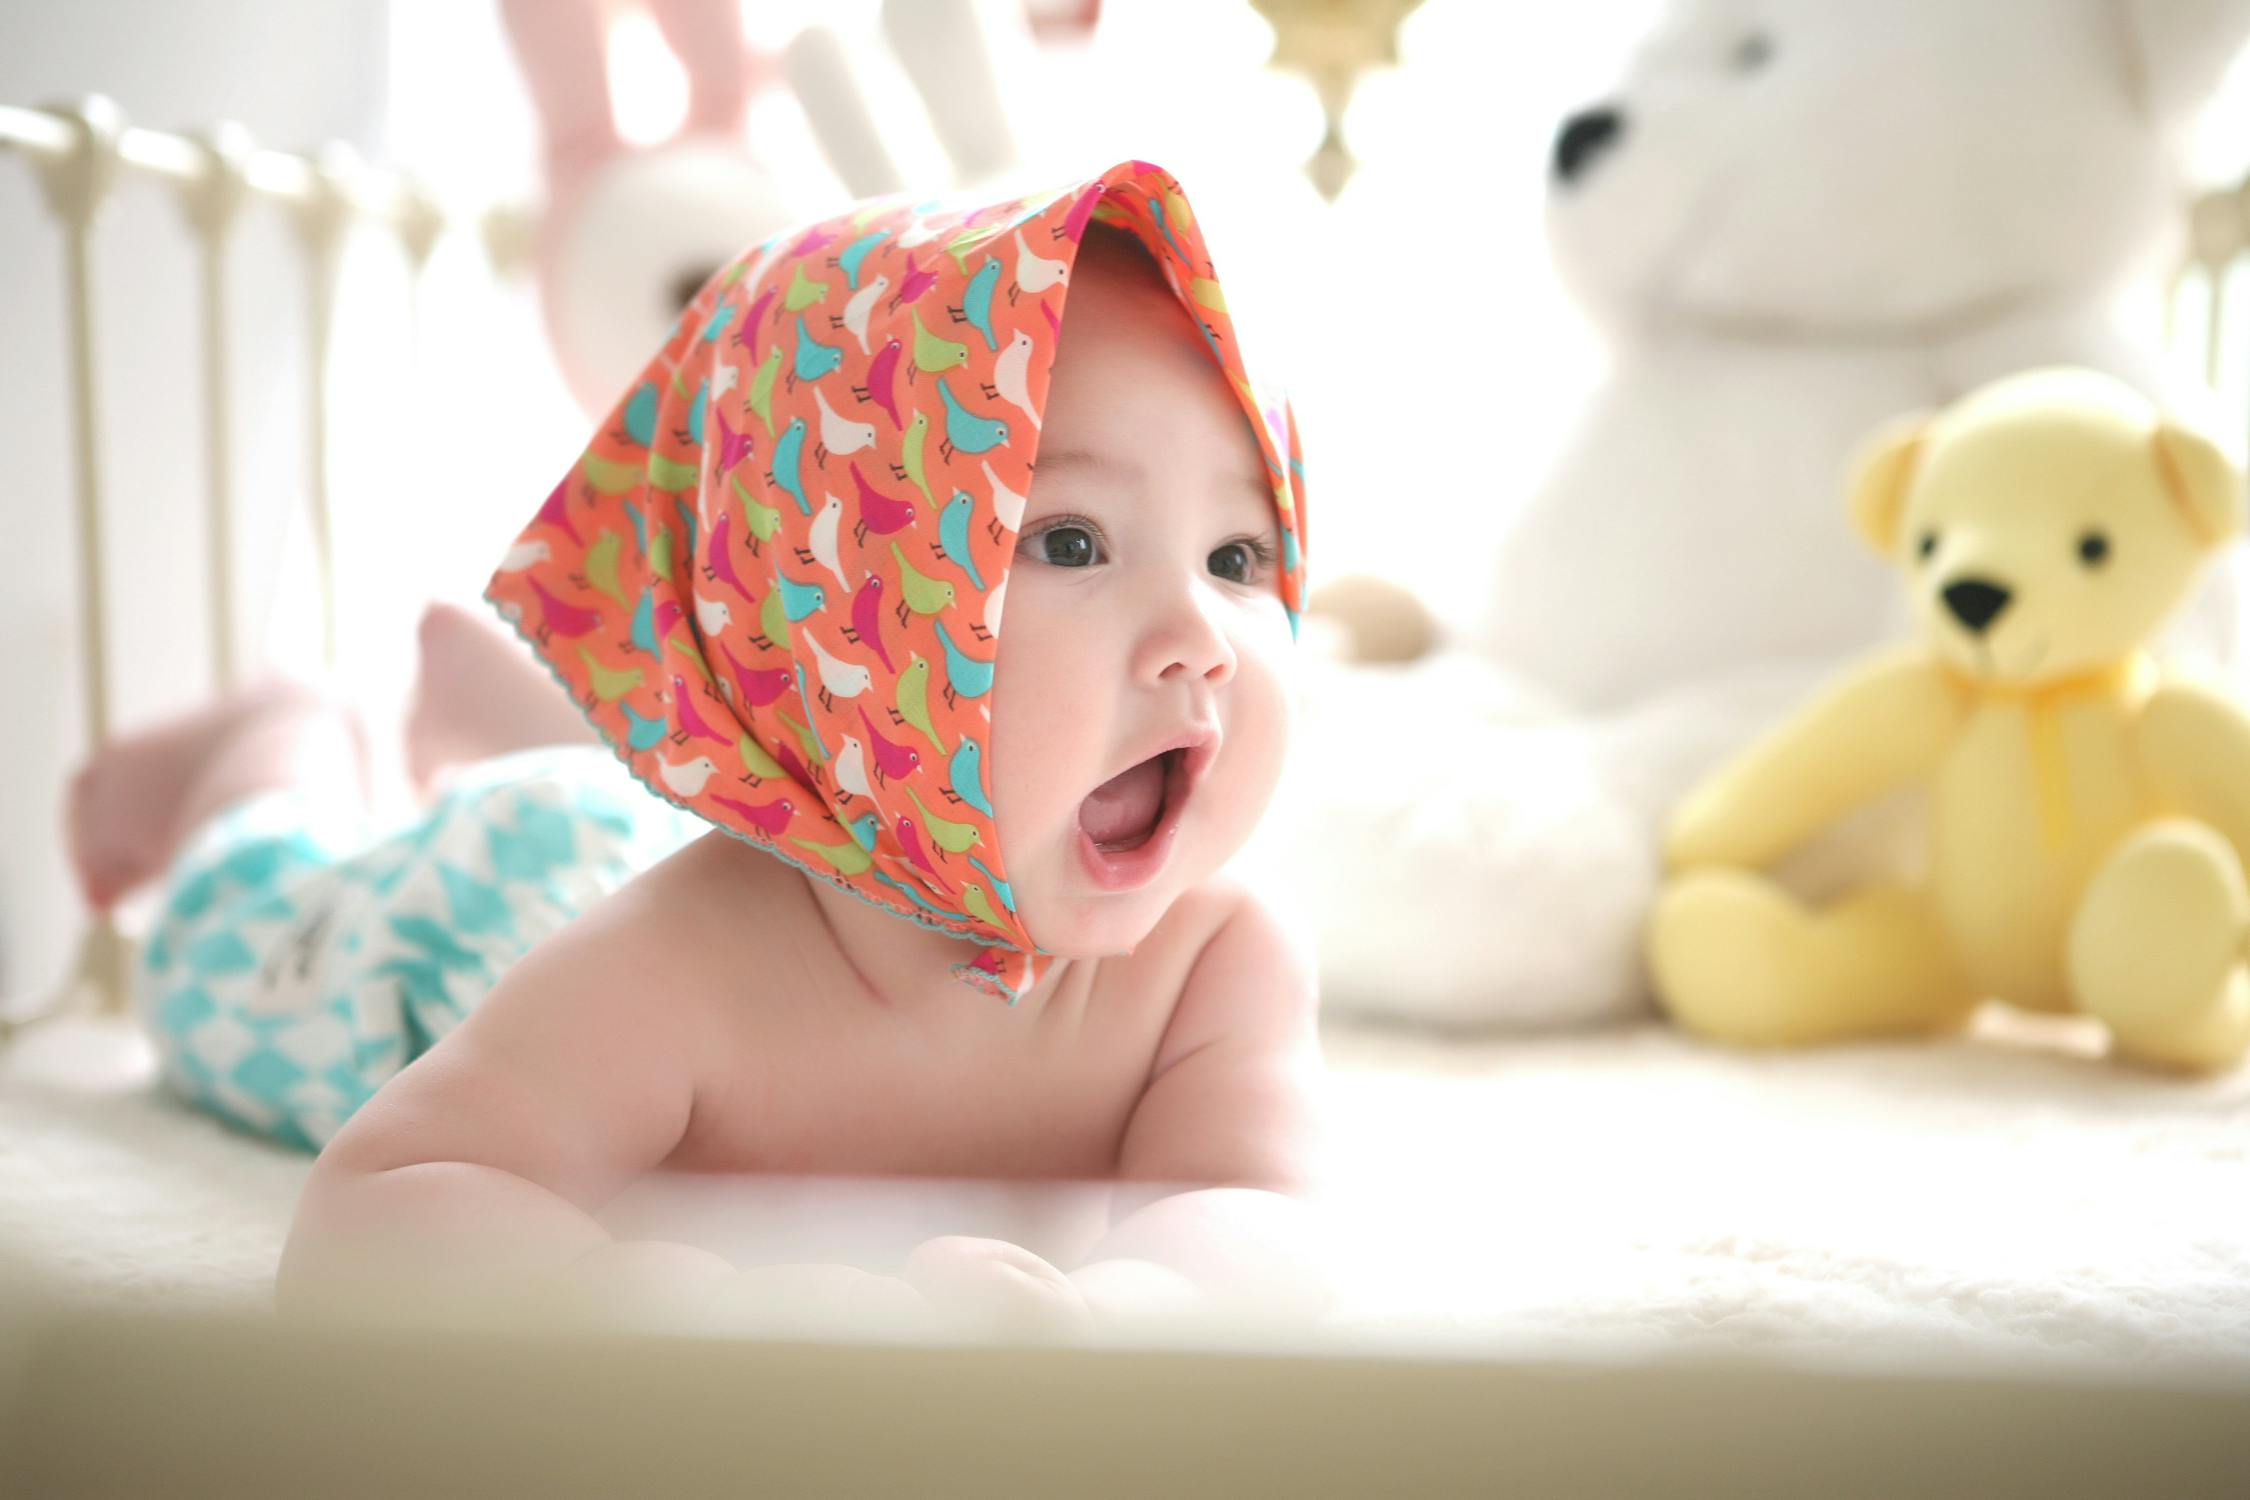 Baby Photo by Pixabay from Pexels